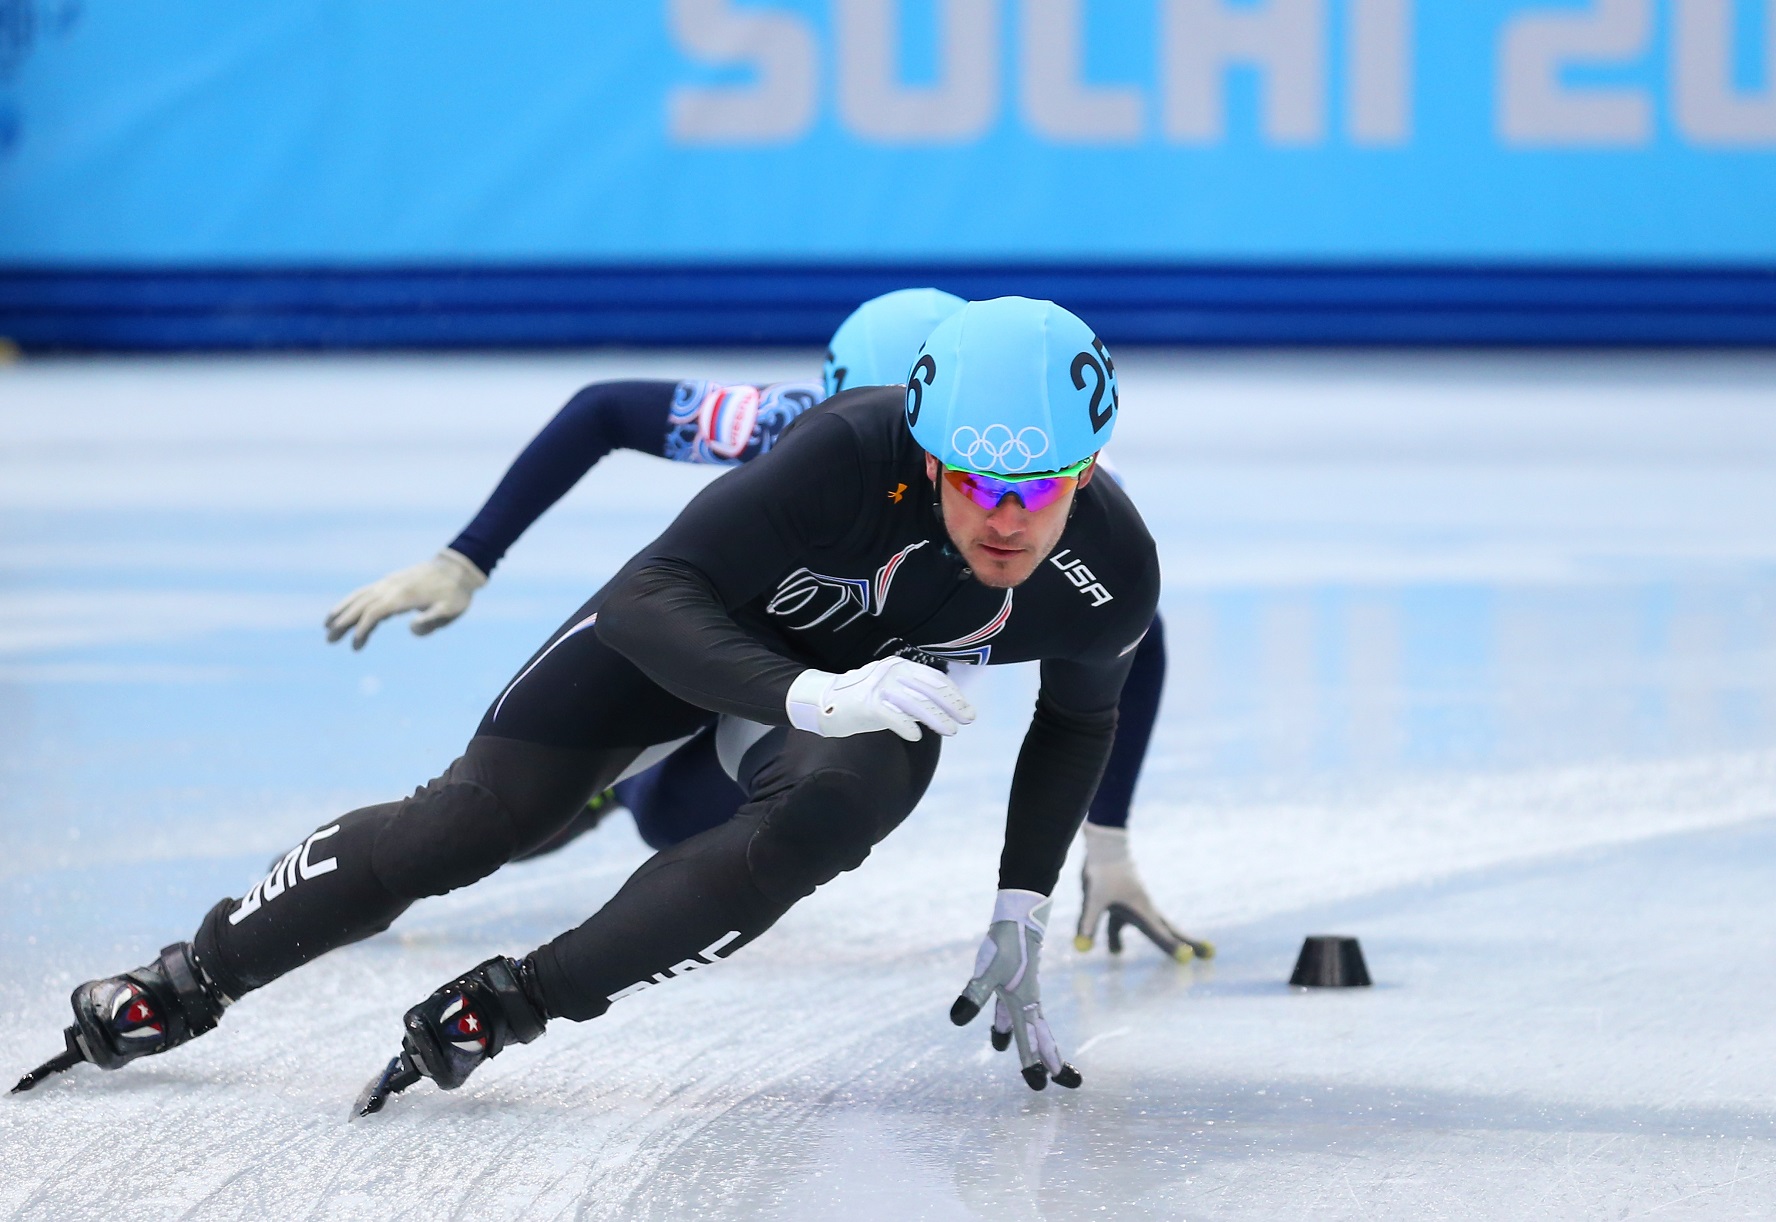 Eddy Alvarez represented the United States in Sochi during the 2014 Winter Olympics. | Matthew Stockman/Getty Images